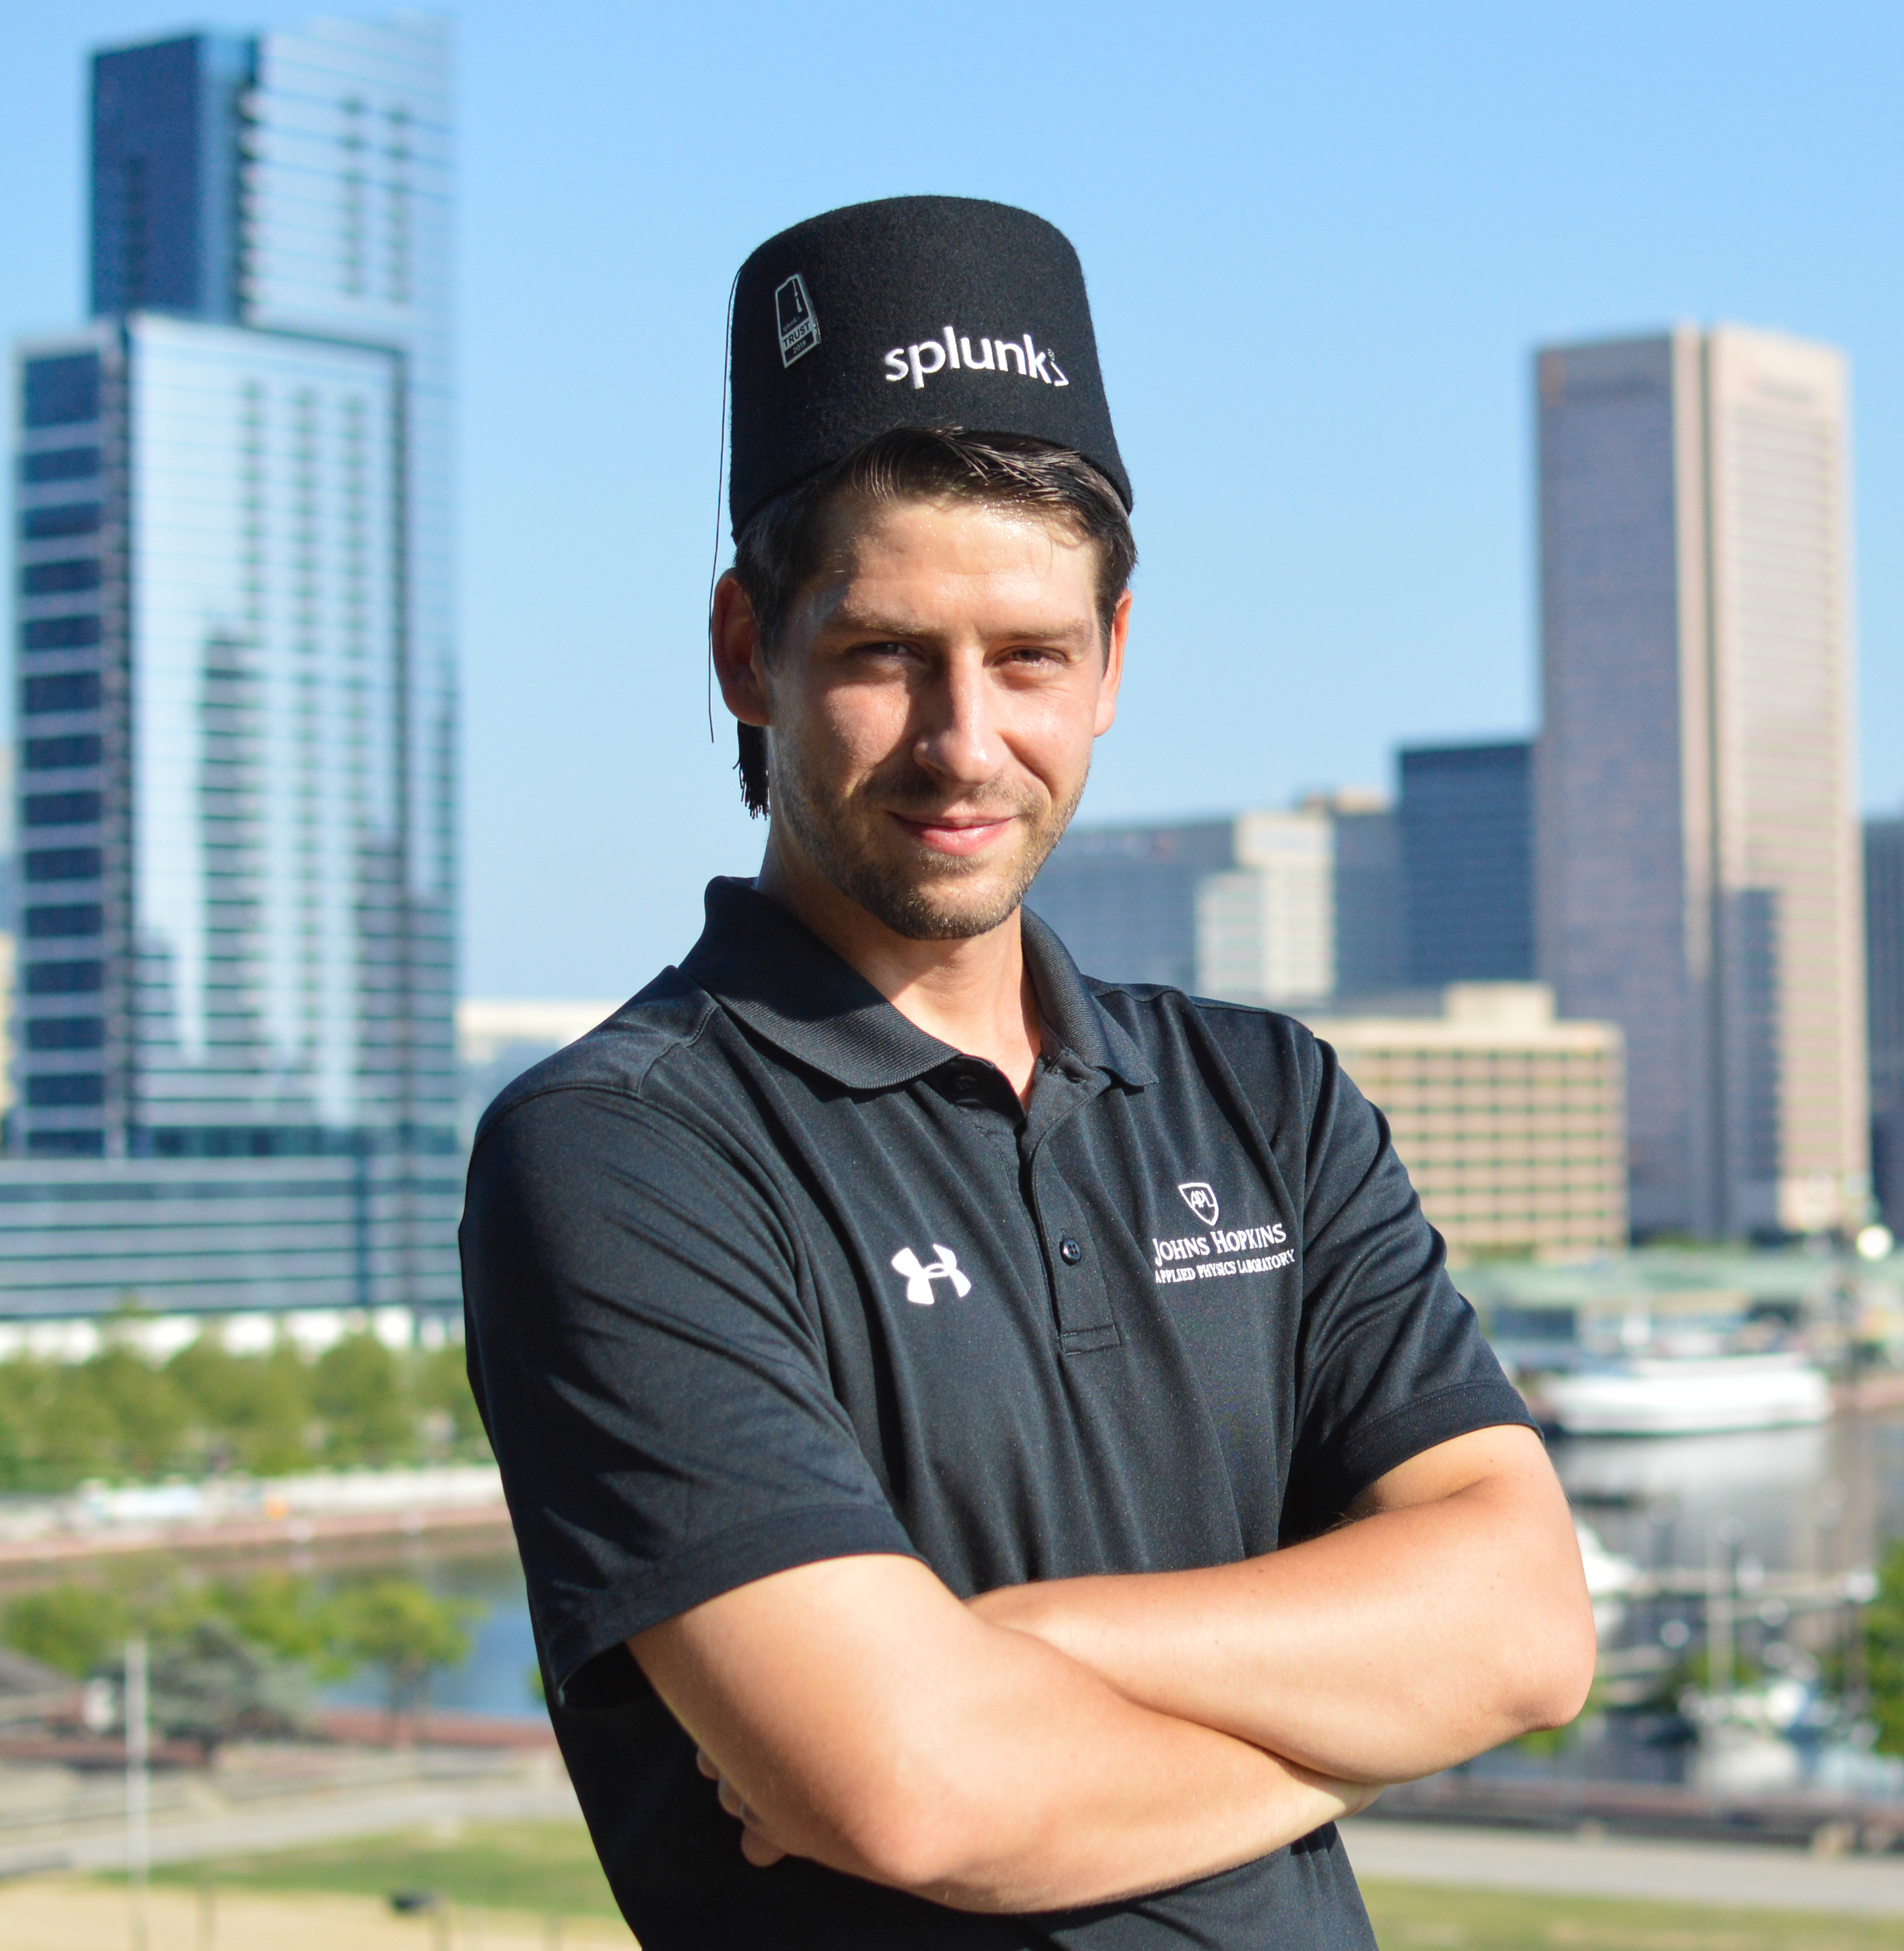 A picture of a man in a black shirt and a splunk hat